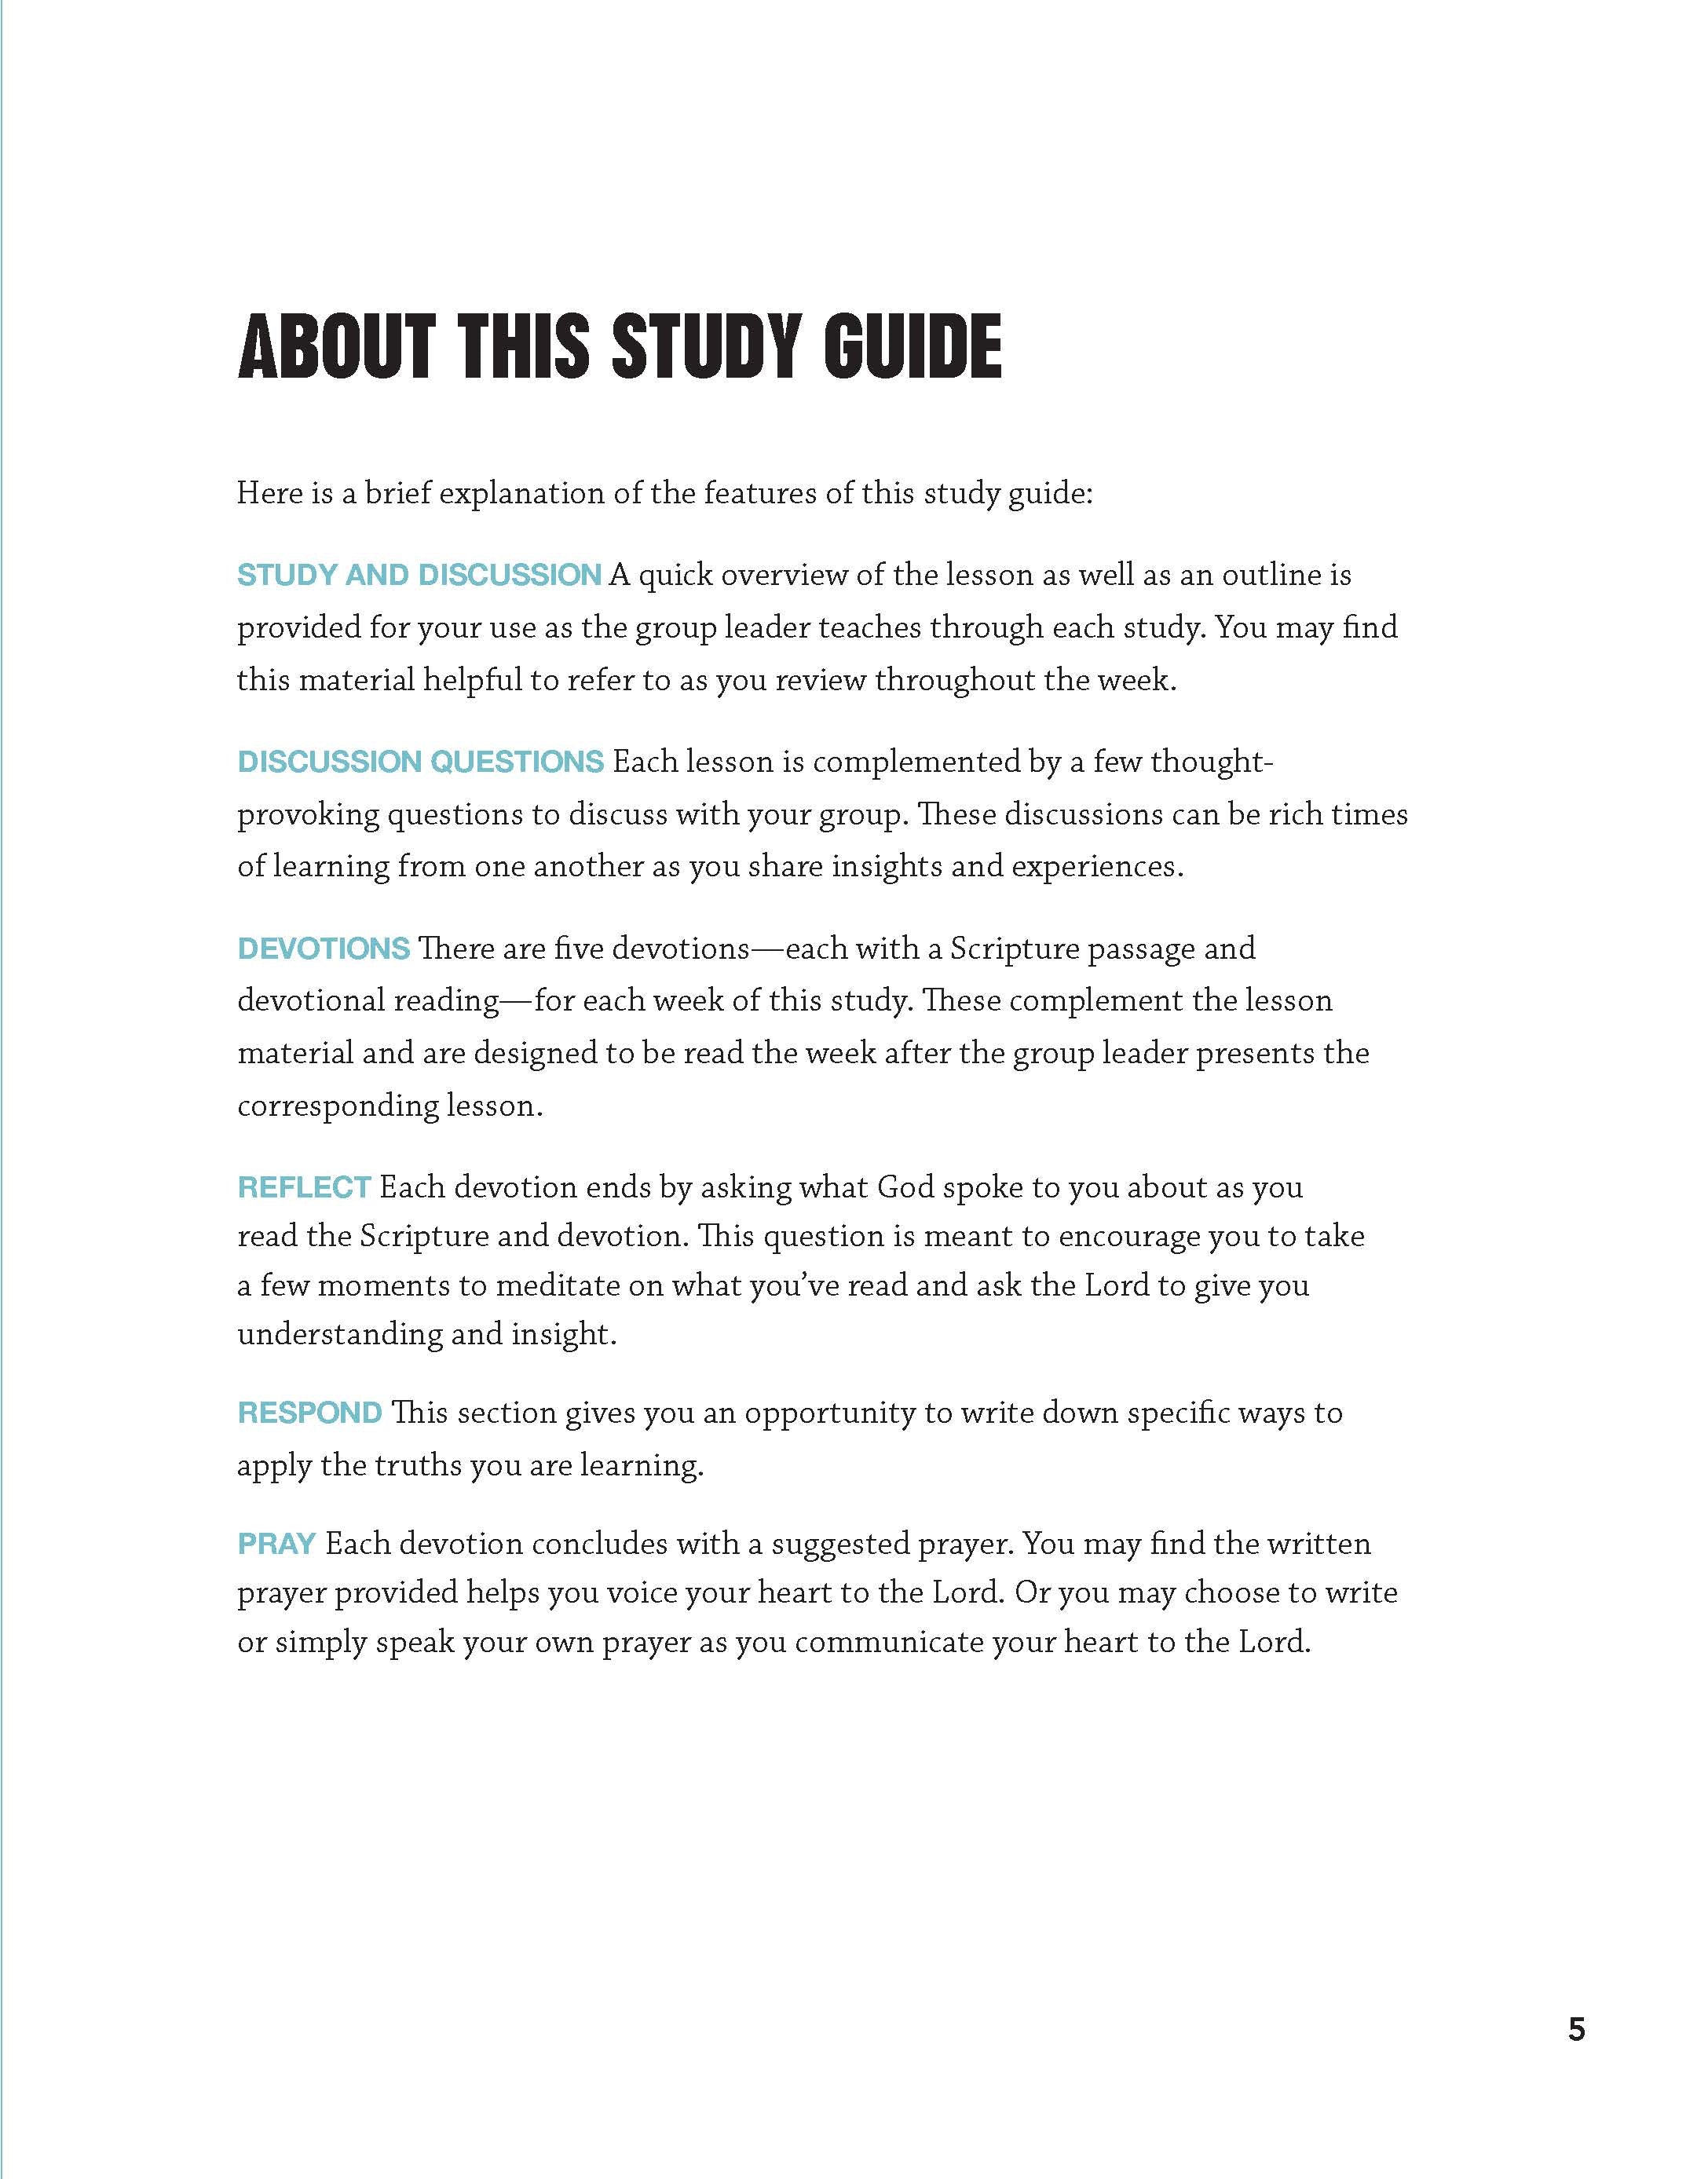 Anchored Study Guide